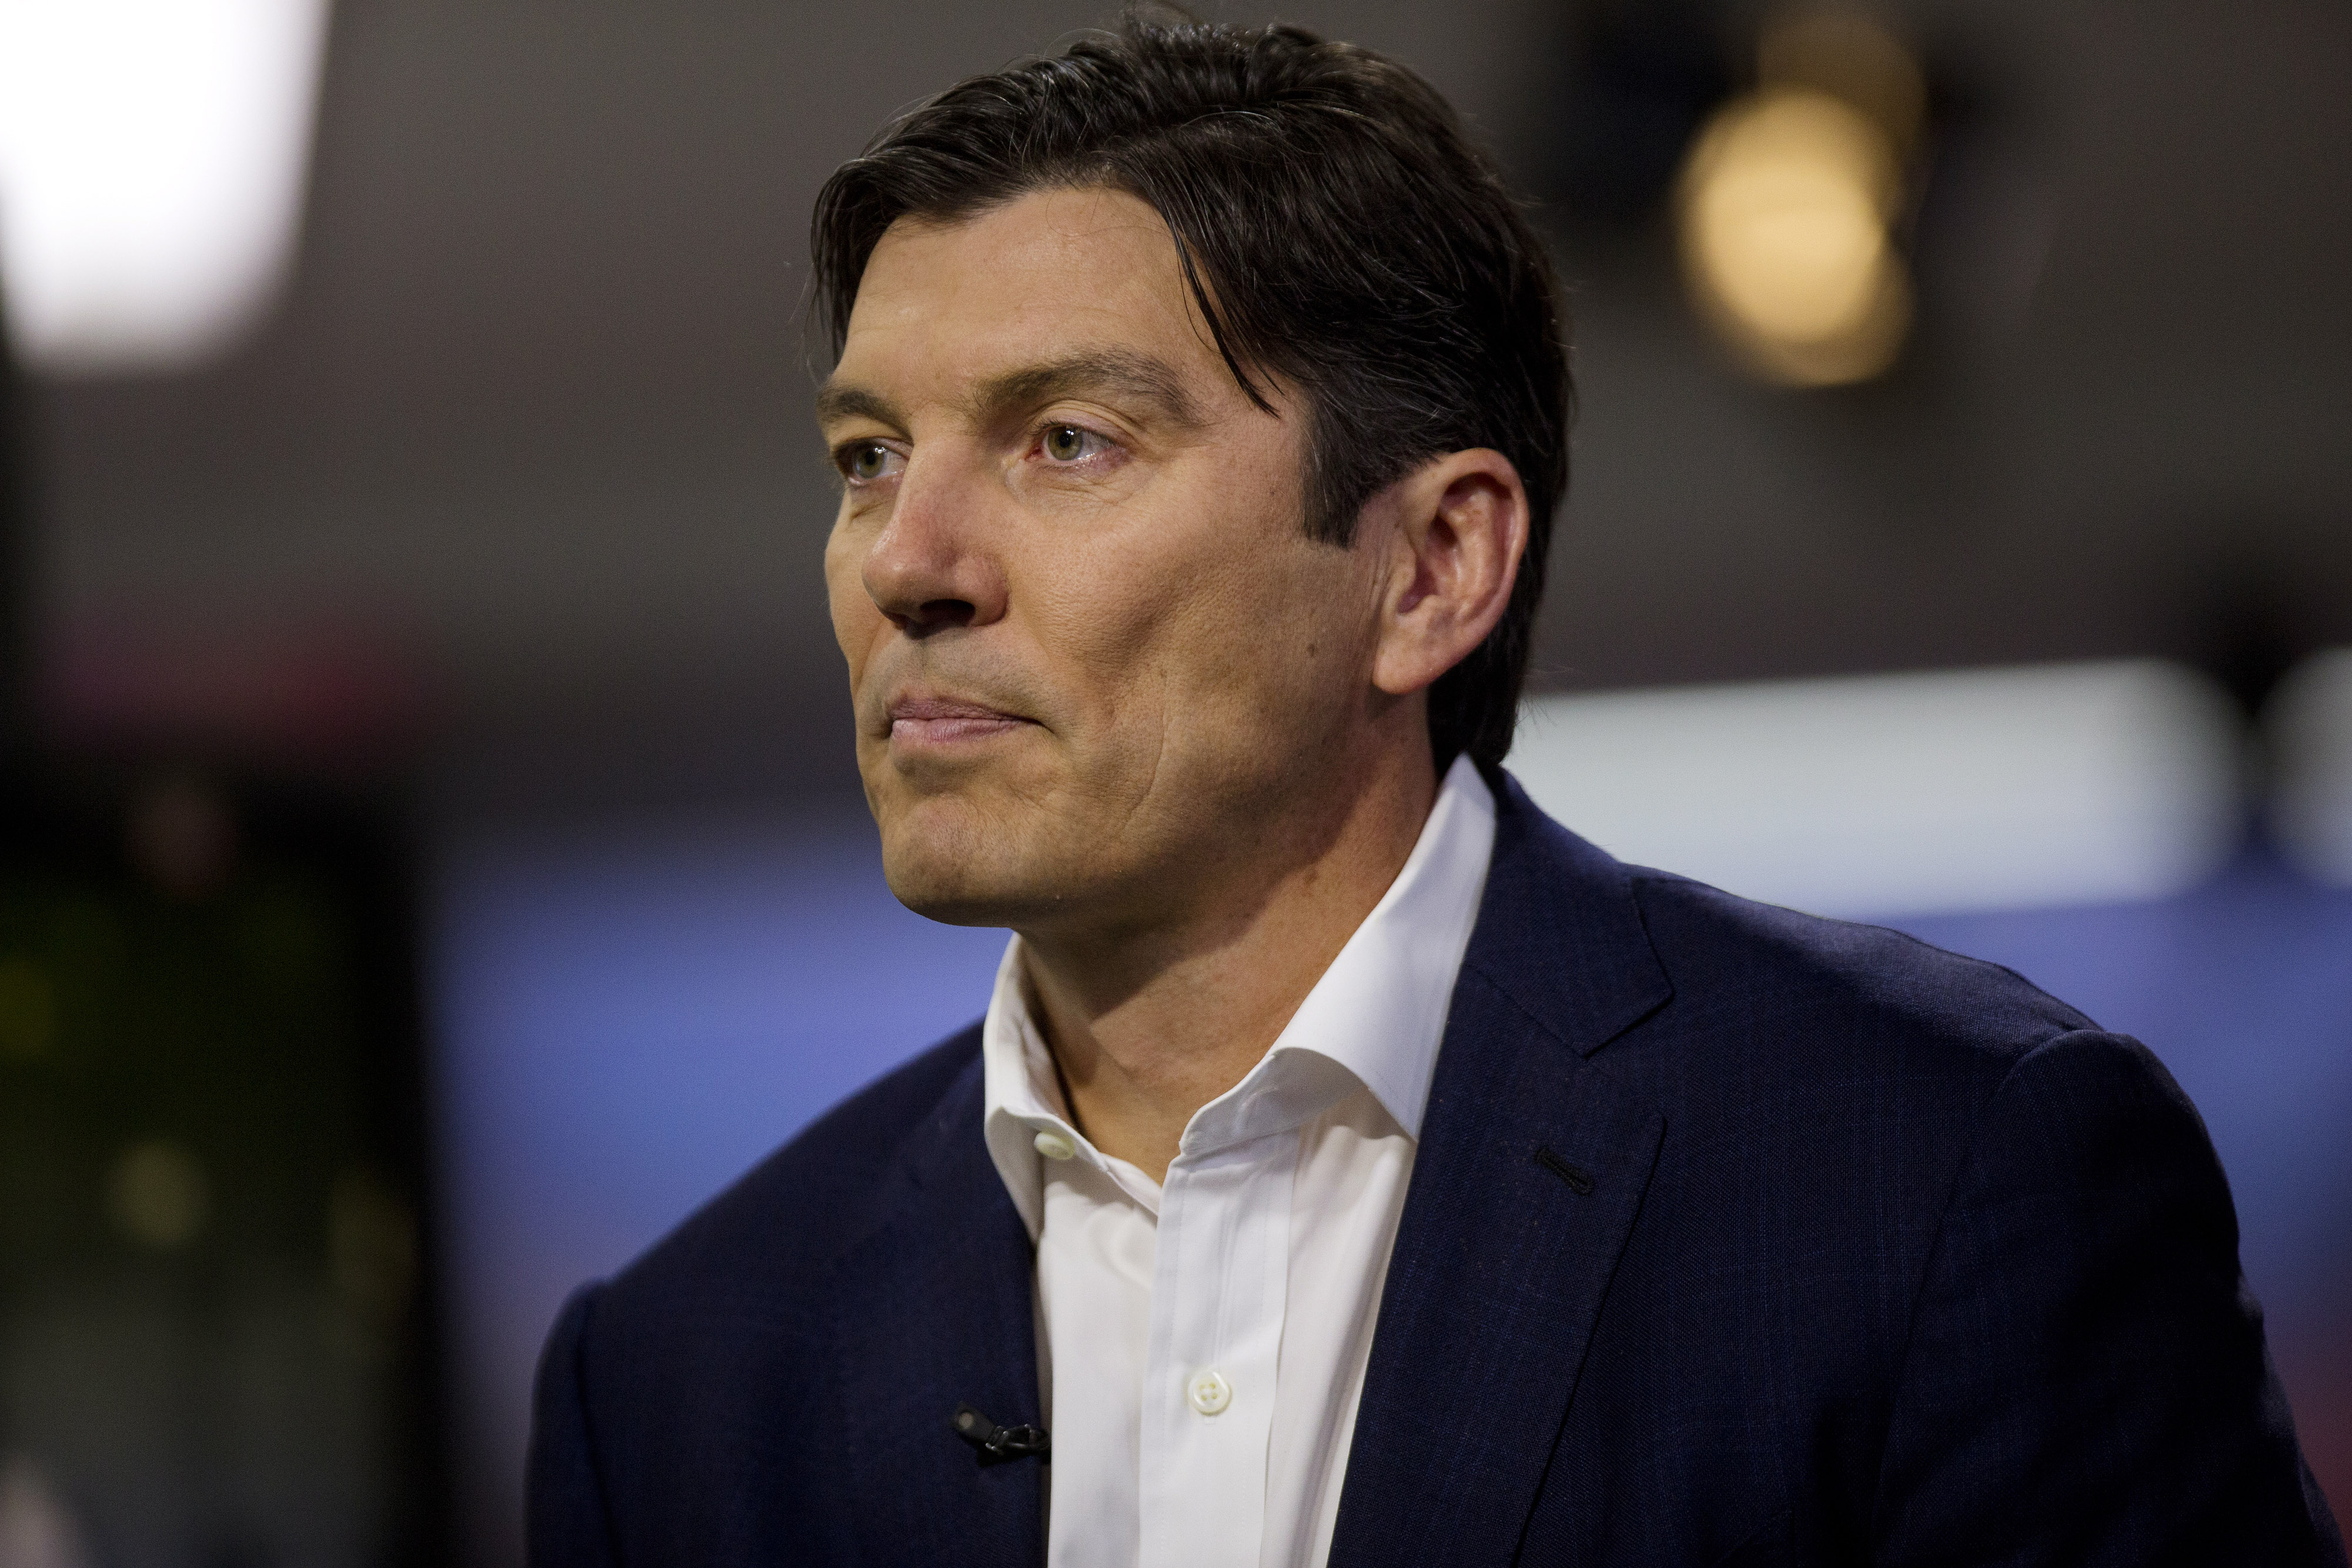 Timothy "Tim" Armstrong, chairman and chief executive officer of AOL Inc., listens to a question during a Bloomberg Television in New York, U.S., on Friday, June 27, 2014. (Bloomberg via Getty Images)